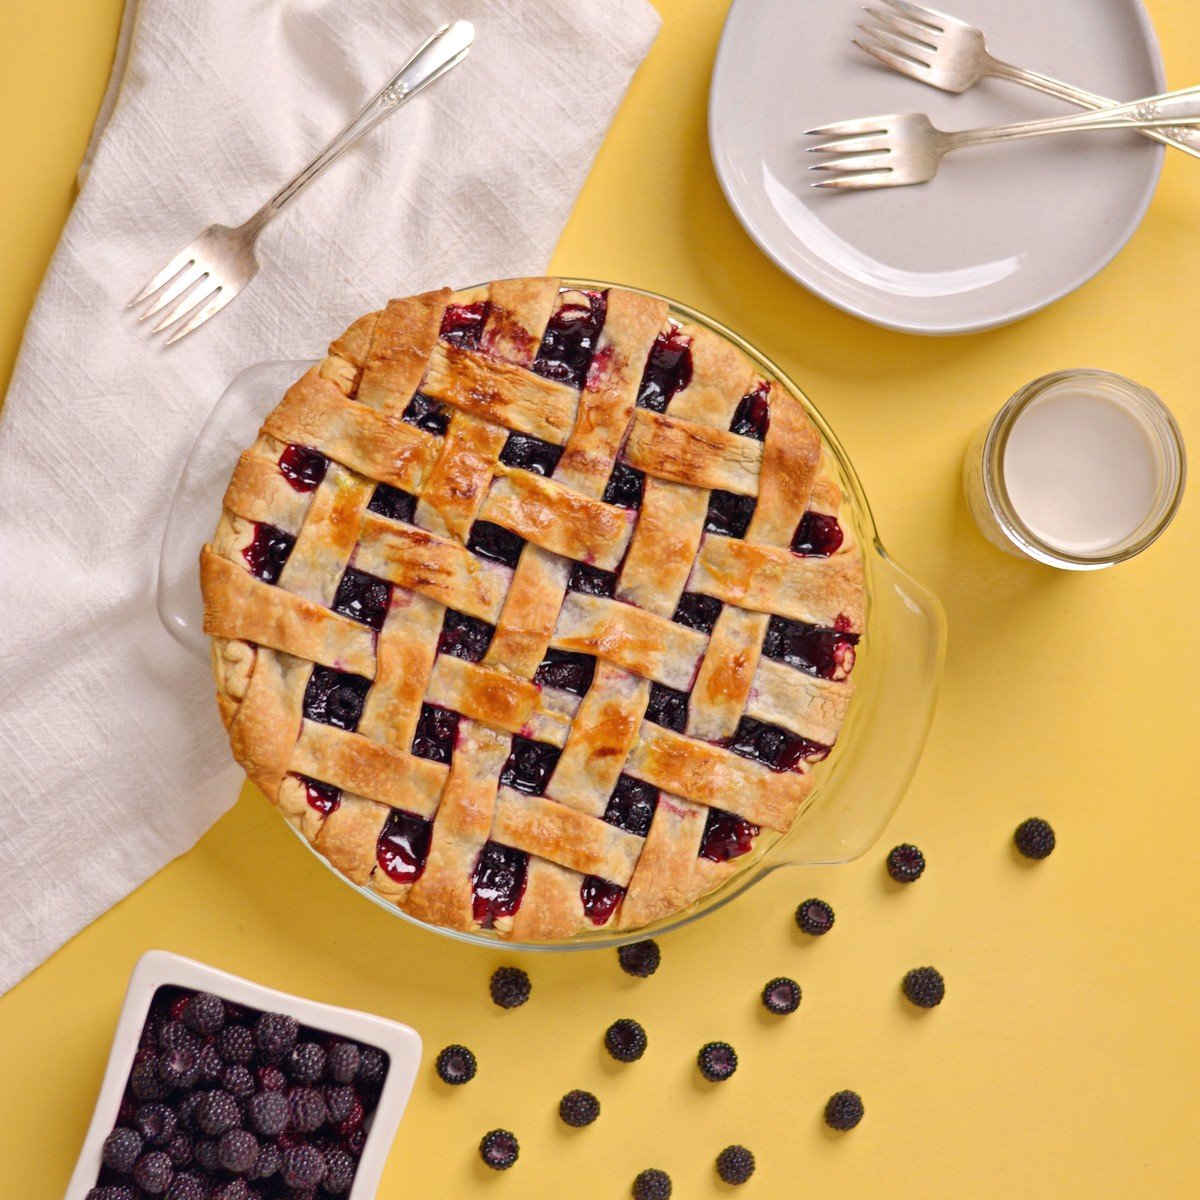 Overhead view of a pie with blackberries next to it.